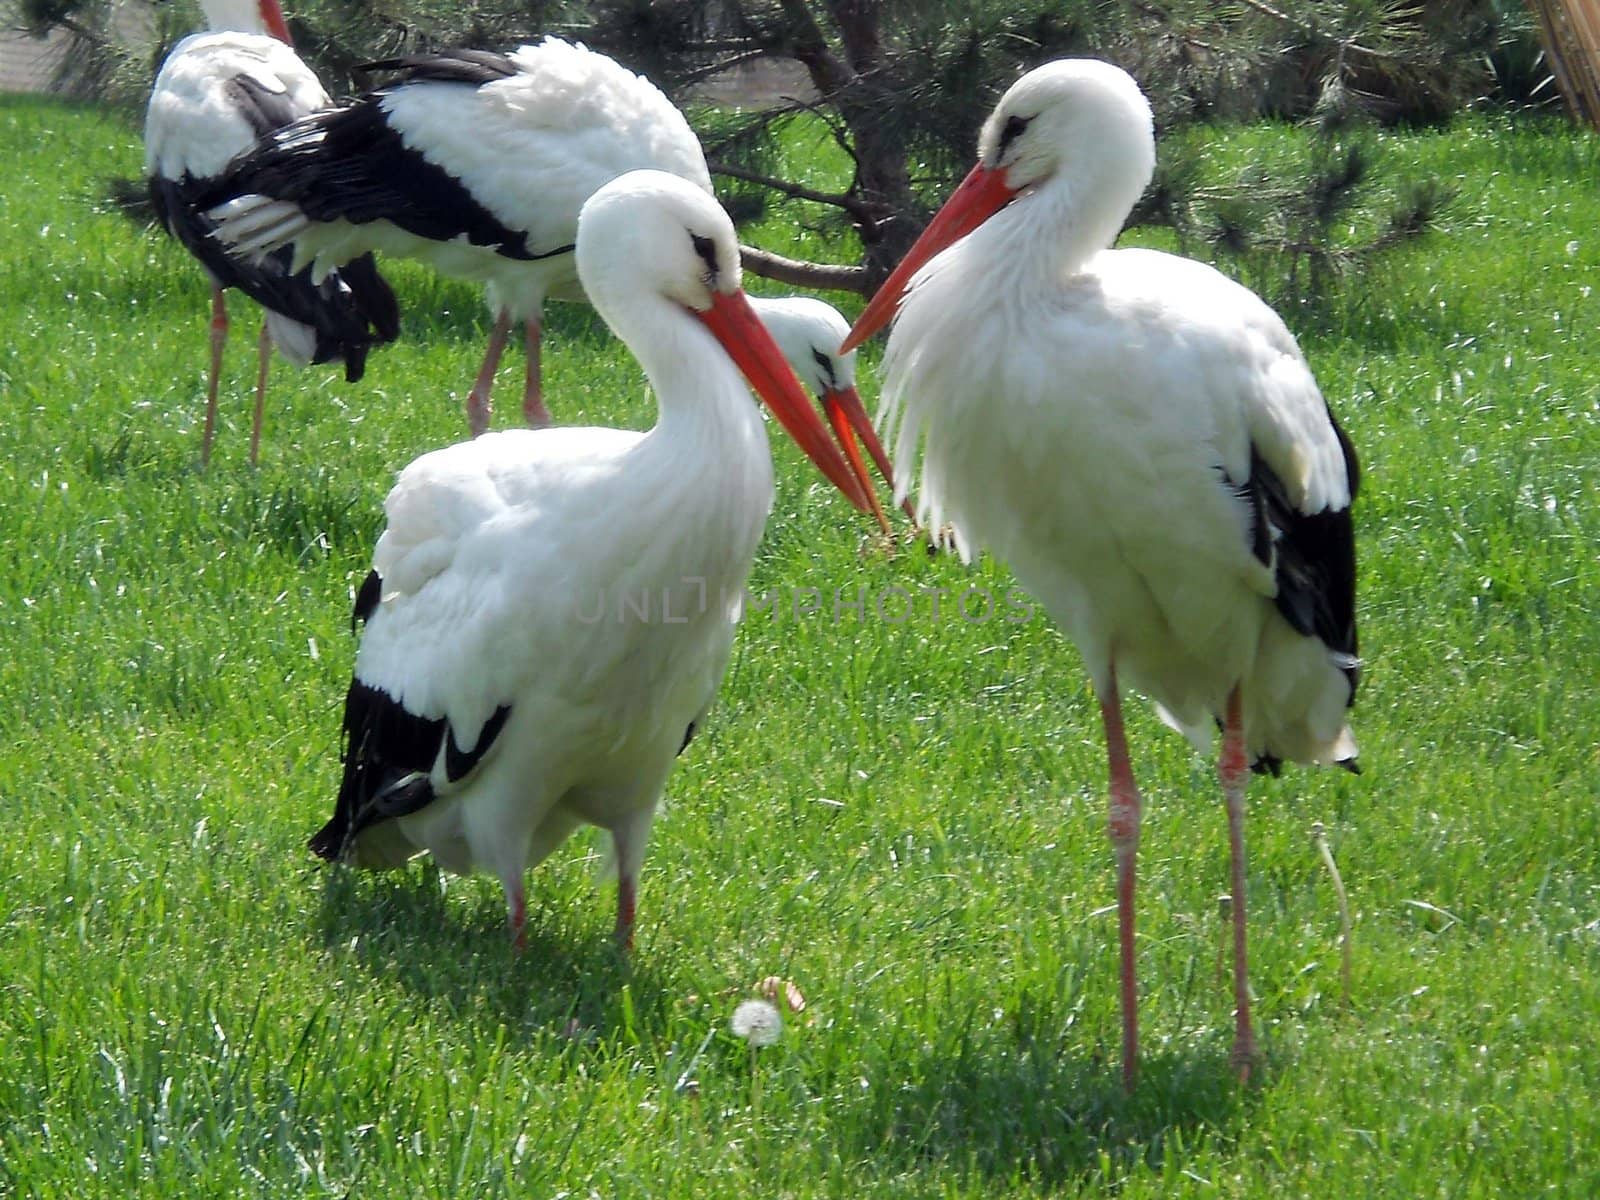 Storks in city park by georg777